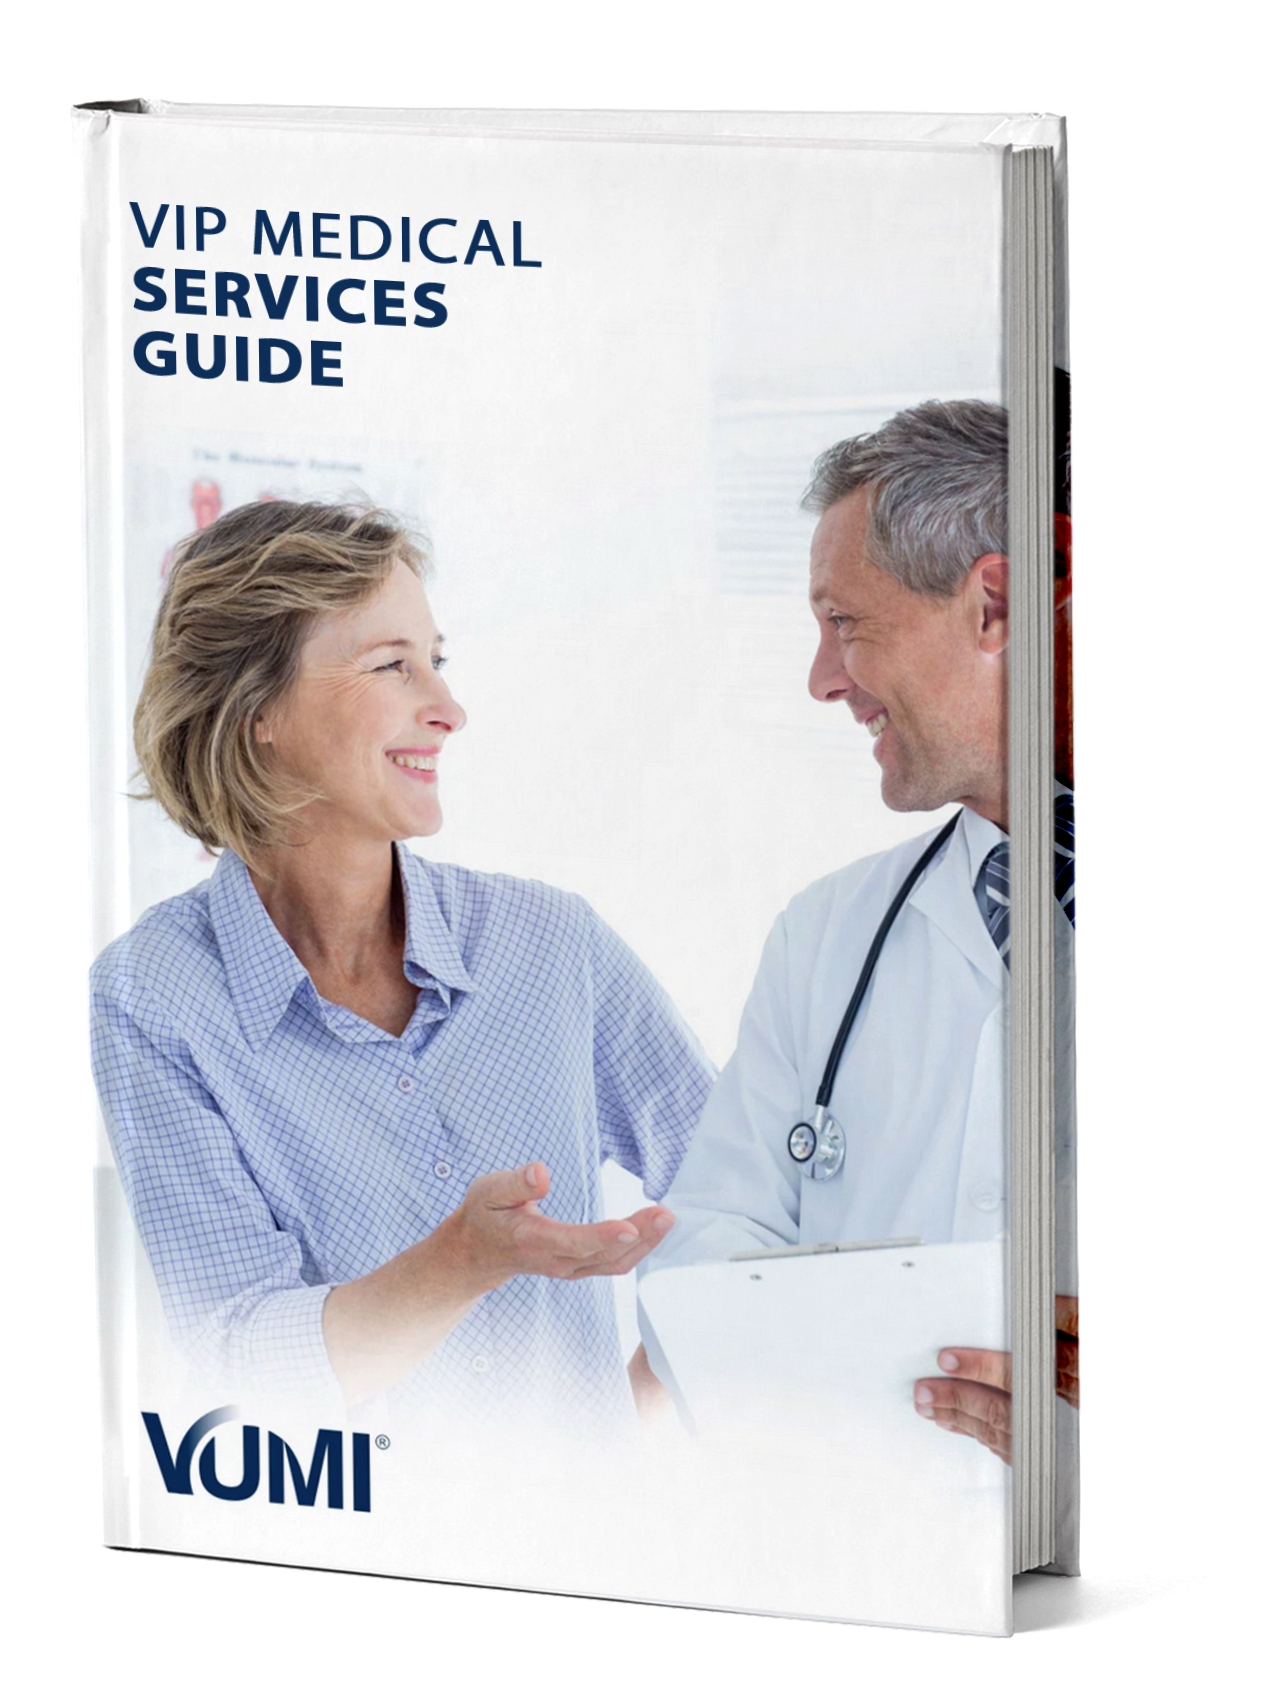 Vip medical services guide